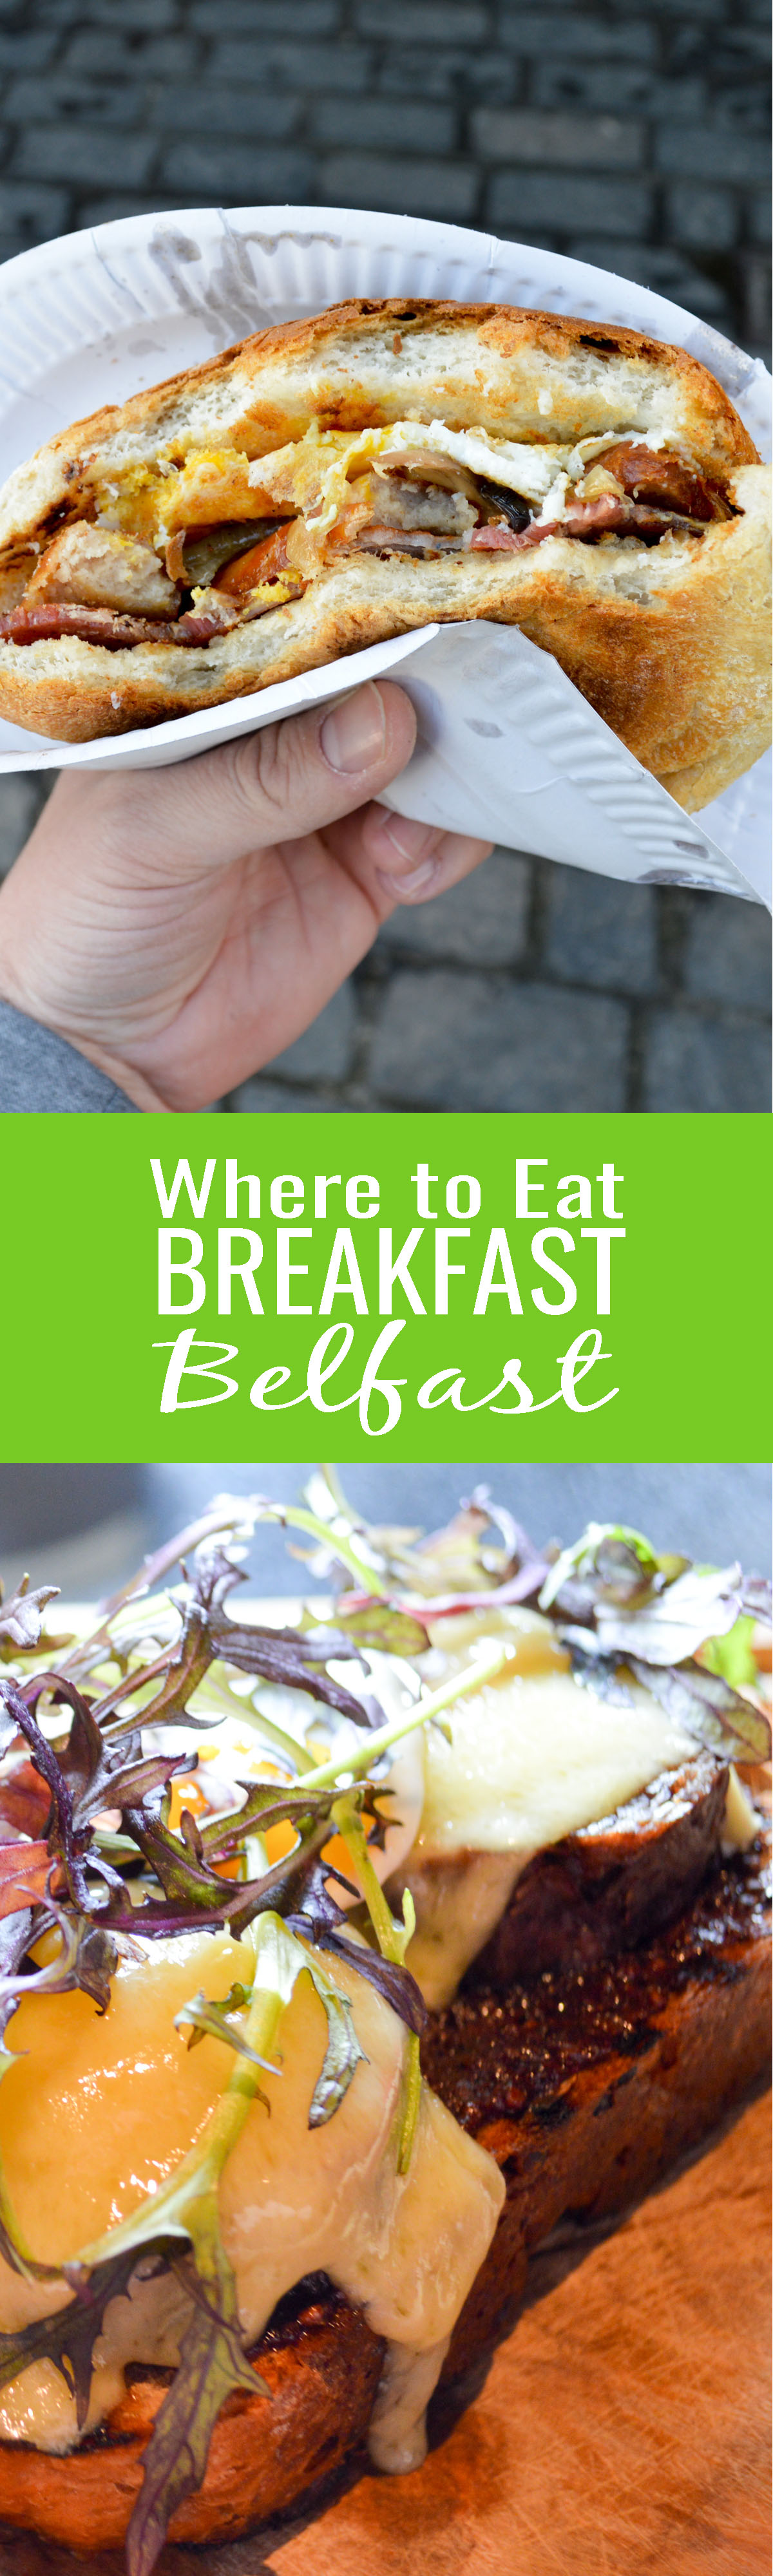 From five star restaurants to greasy spoon diners, we cover it all in our guide of where to eat breakfast in Belfast.